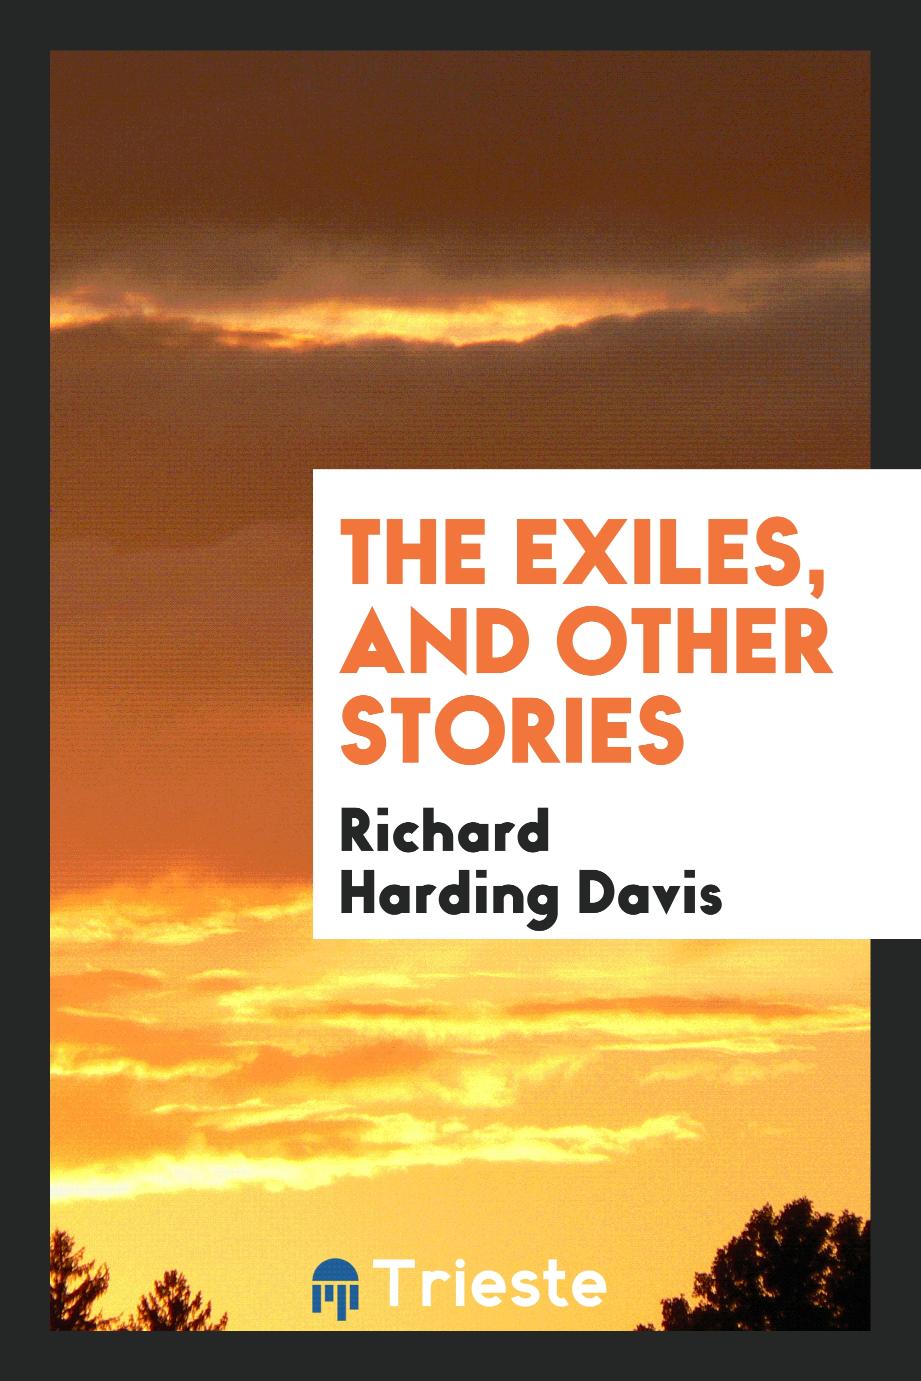 The exiles, and other stories